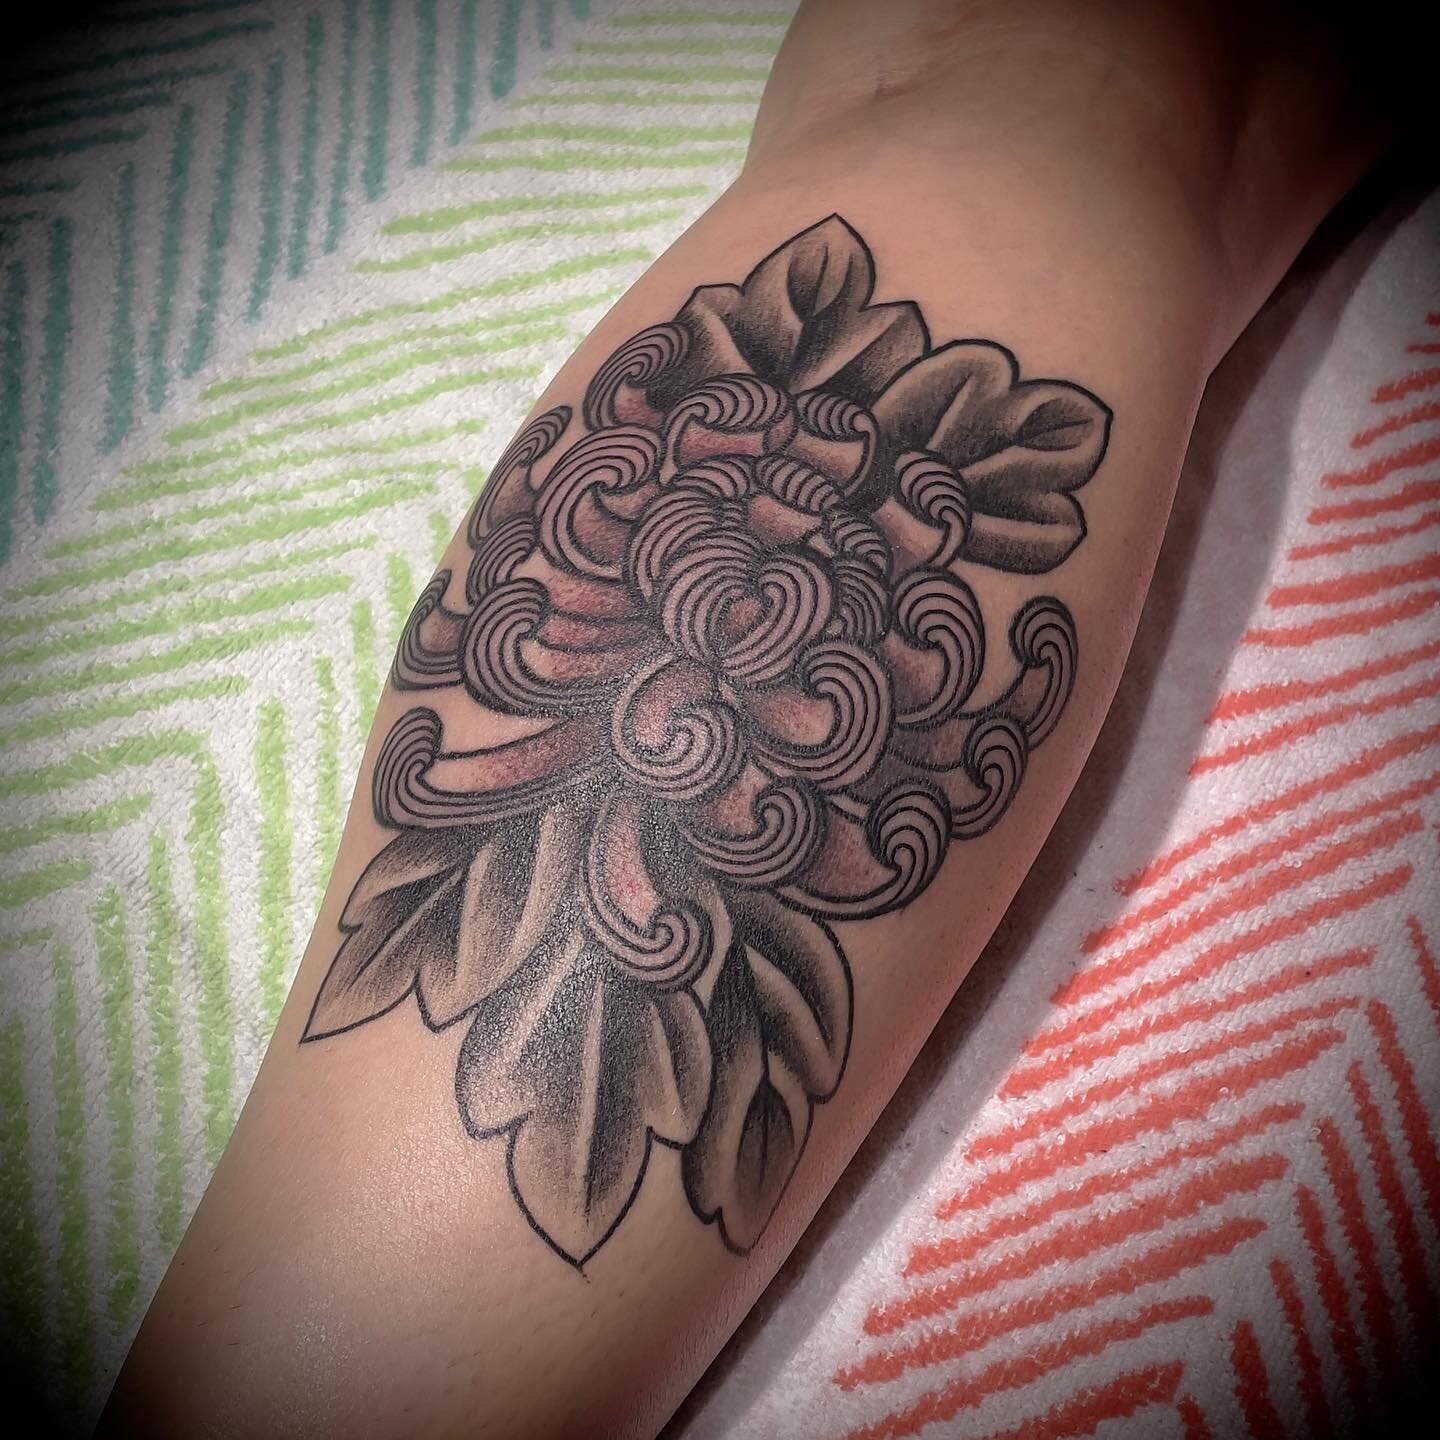 Put some veins and some shading in this chrysanthemum for Sophia the great! (cherry blossoms on the left fully healed from sometime ago)